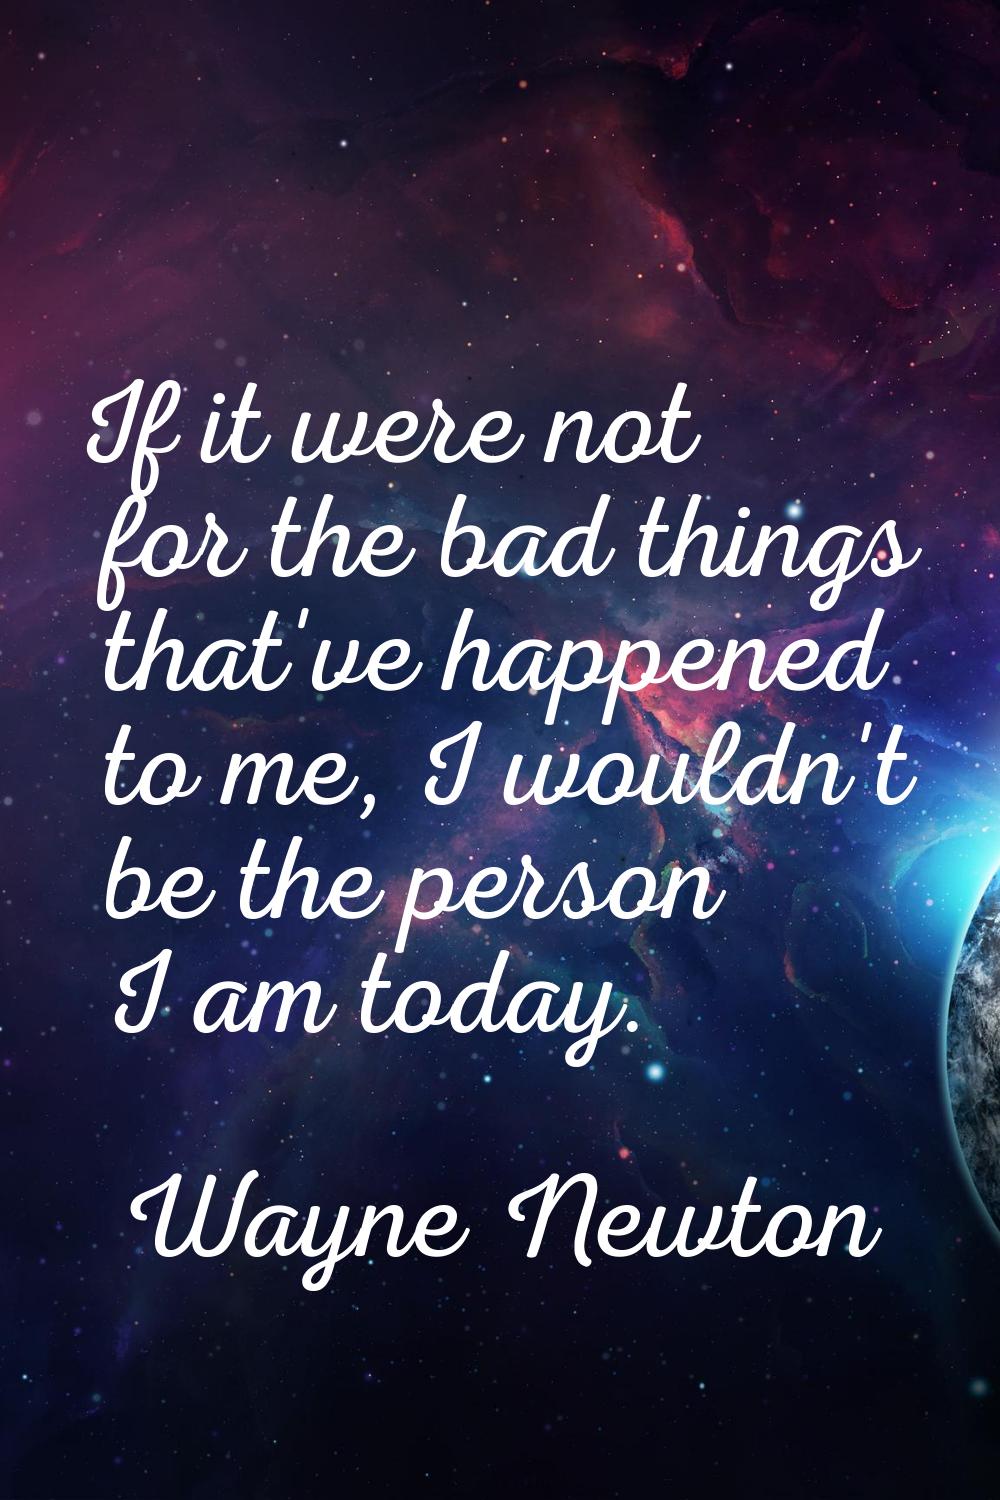 If it were not for the bad things that've happened to me, I wouldn't be the person I am today.